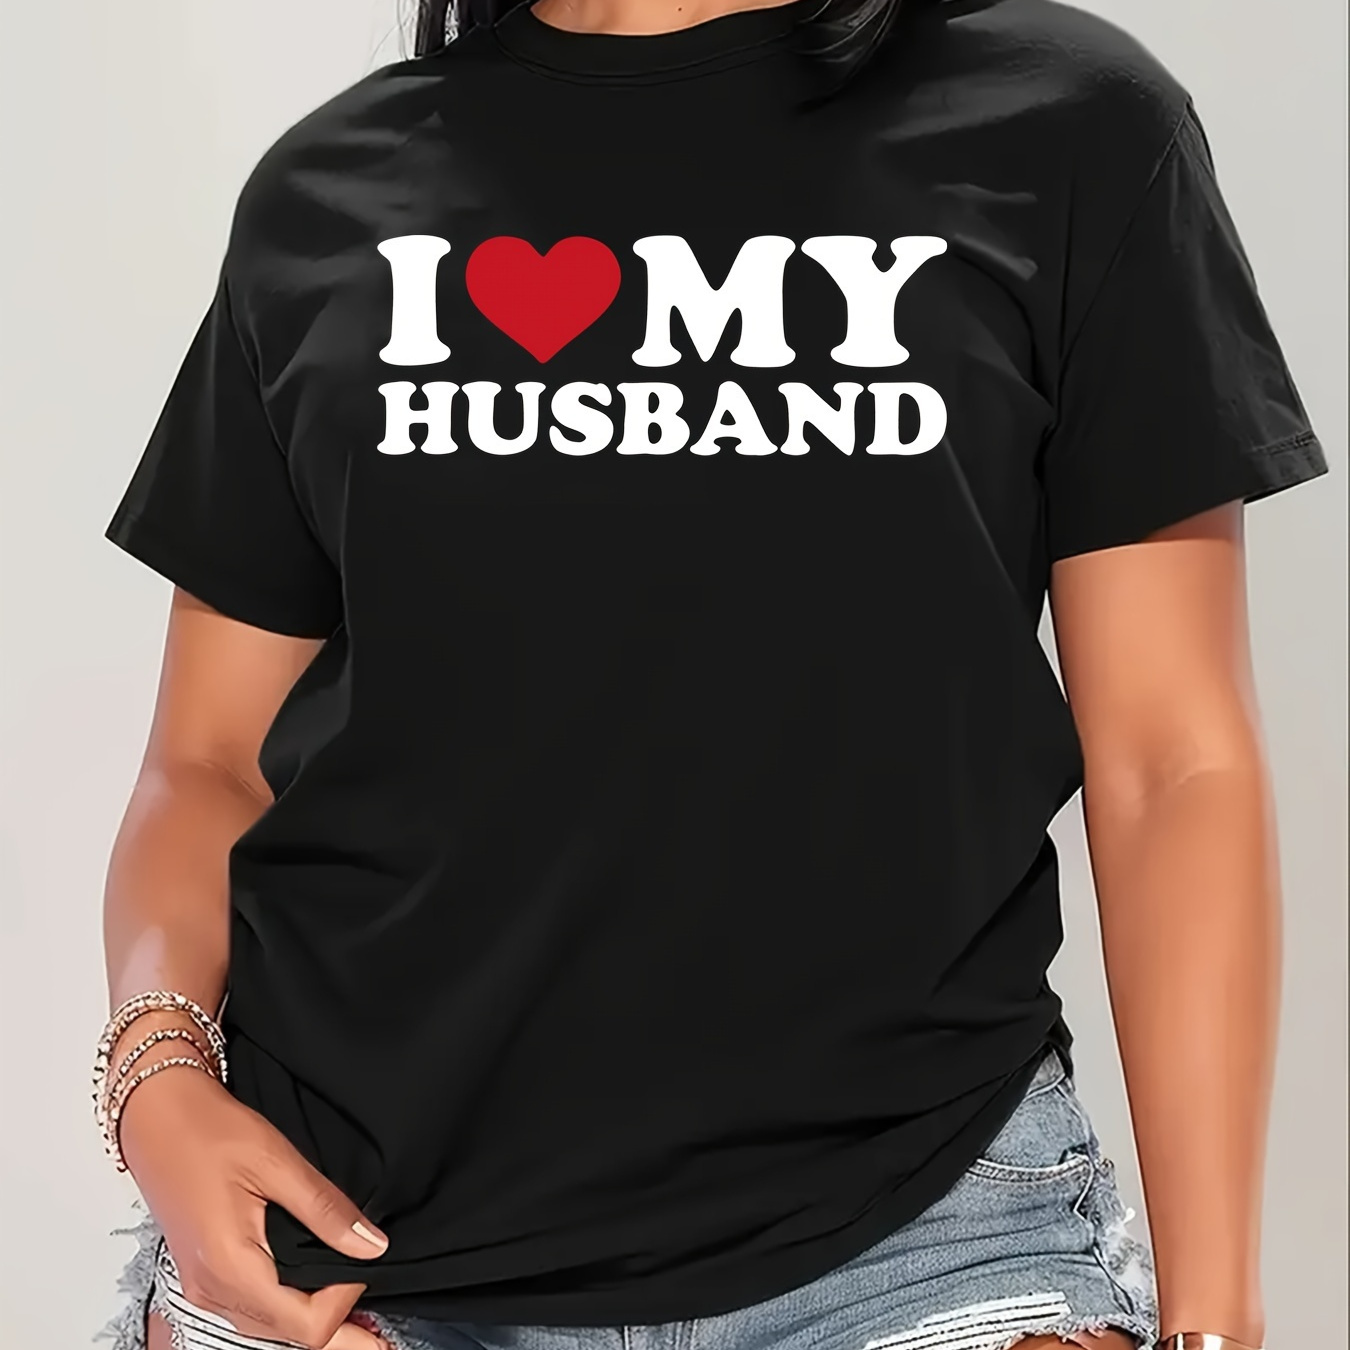 

Love My Husband Print T-shirt, Short Sleeve Crew Neck Casual Top For Summer & Spring, Women's Clothing